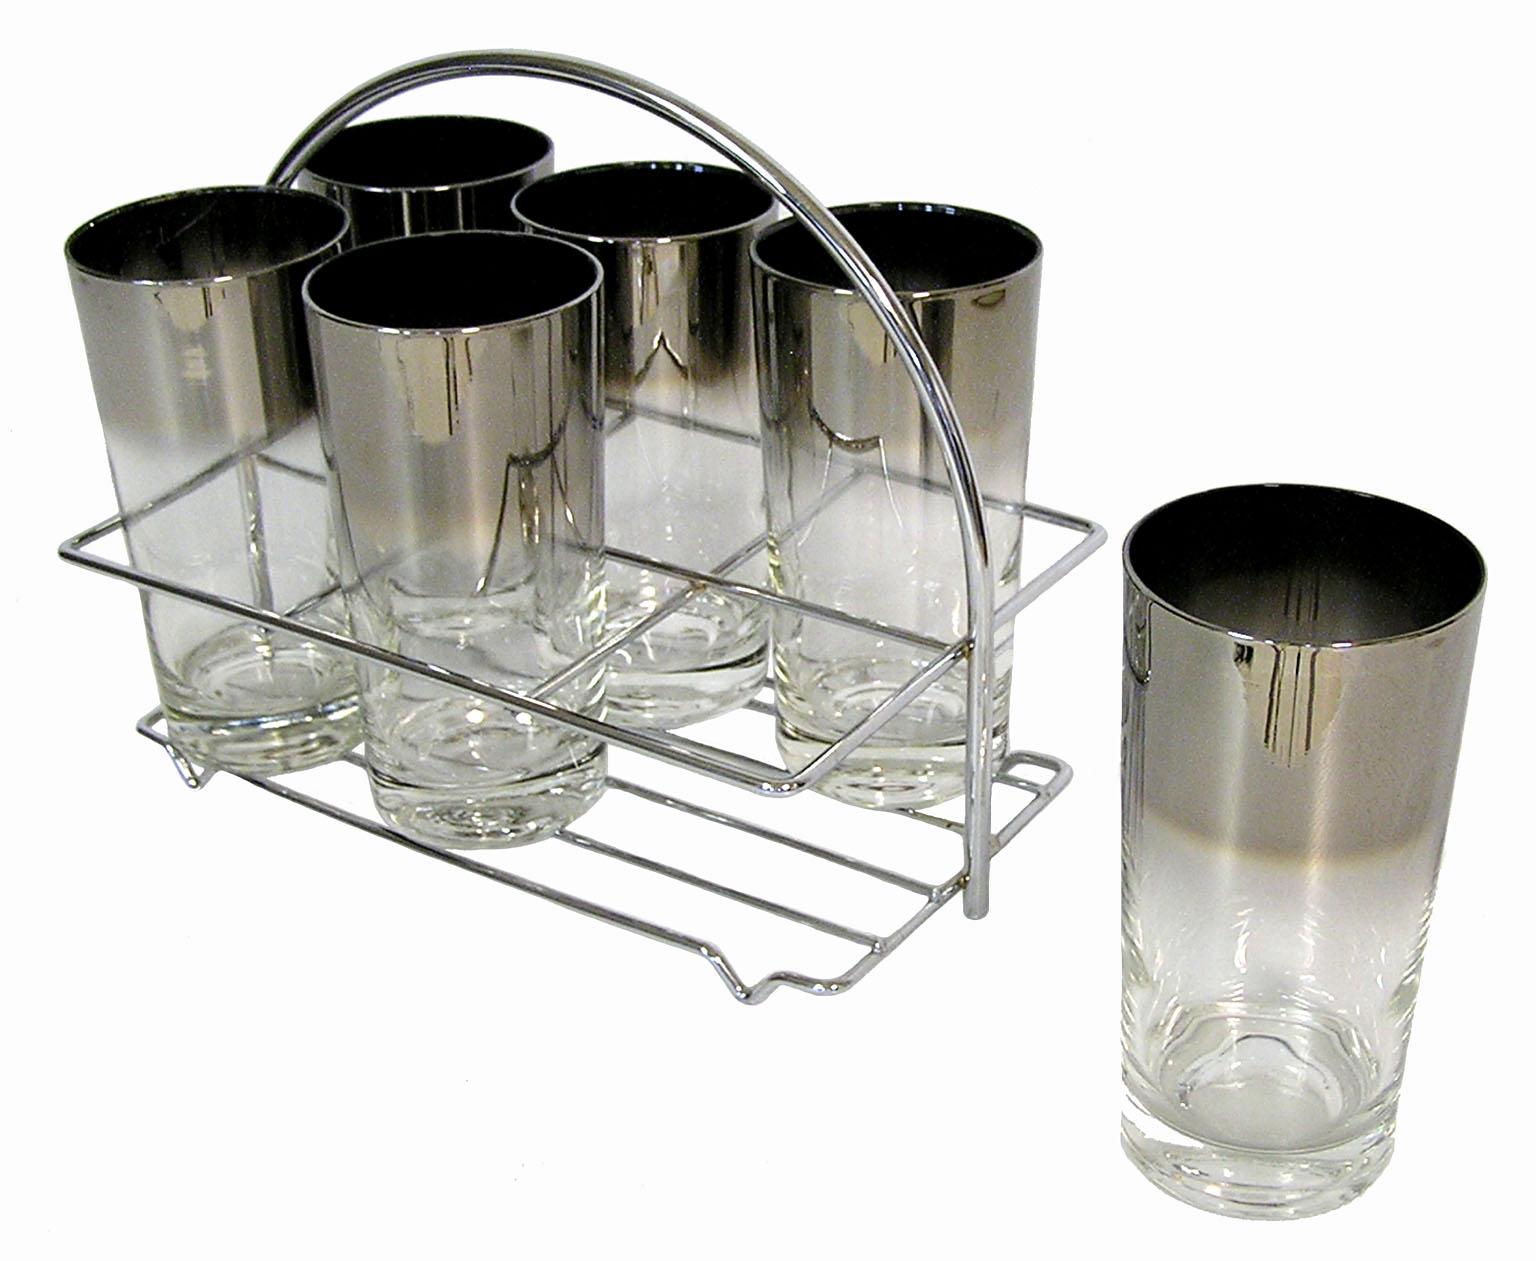 A set of six Dorothy Thorpe silver fade 12 ounce highball glasses from the 1960s Mid-Century Modern era. Set is decorated along the upper half in a faded silver tint and comes in it's original chromed steel carrier. Overall excellent condition.